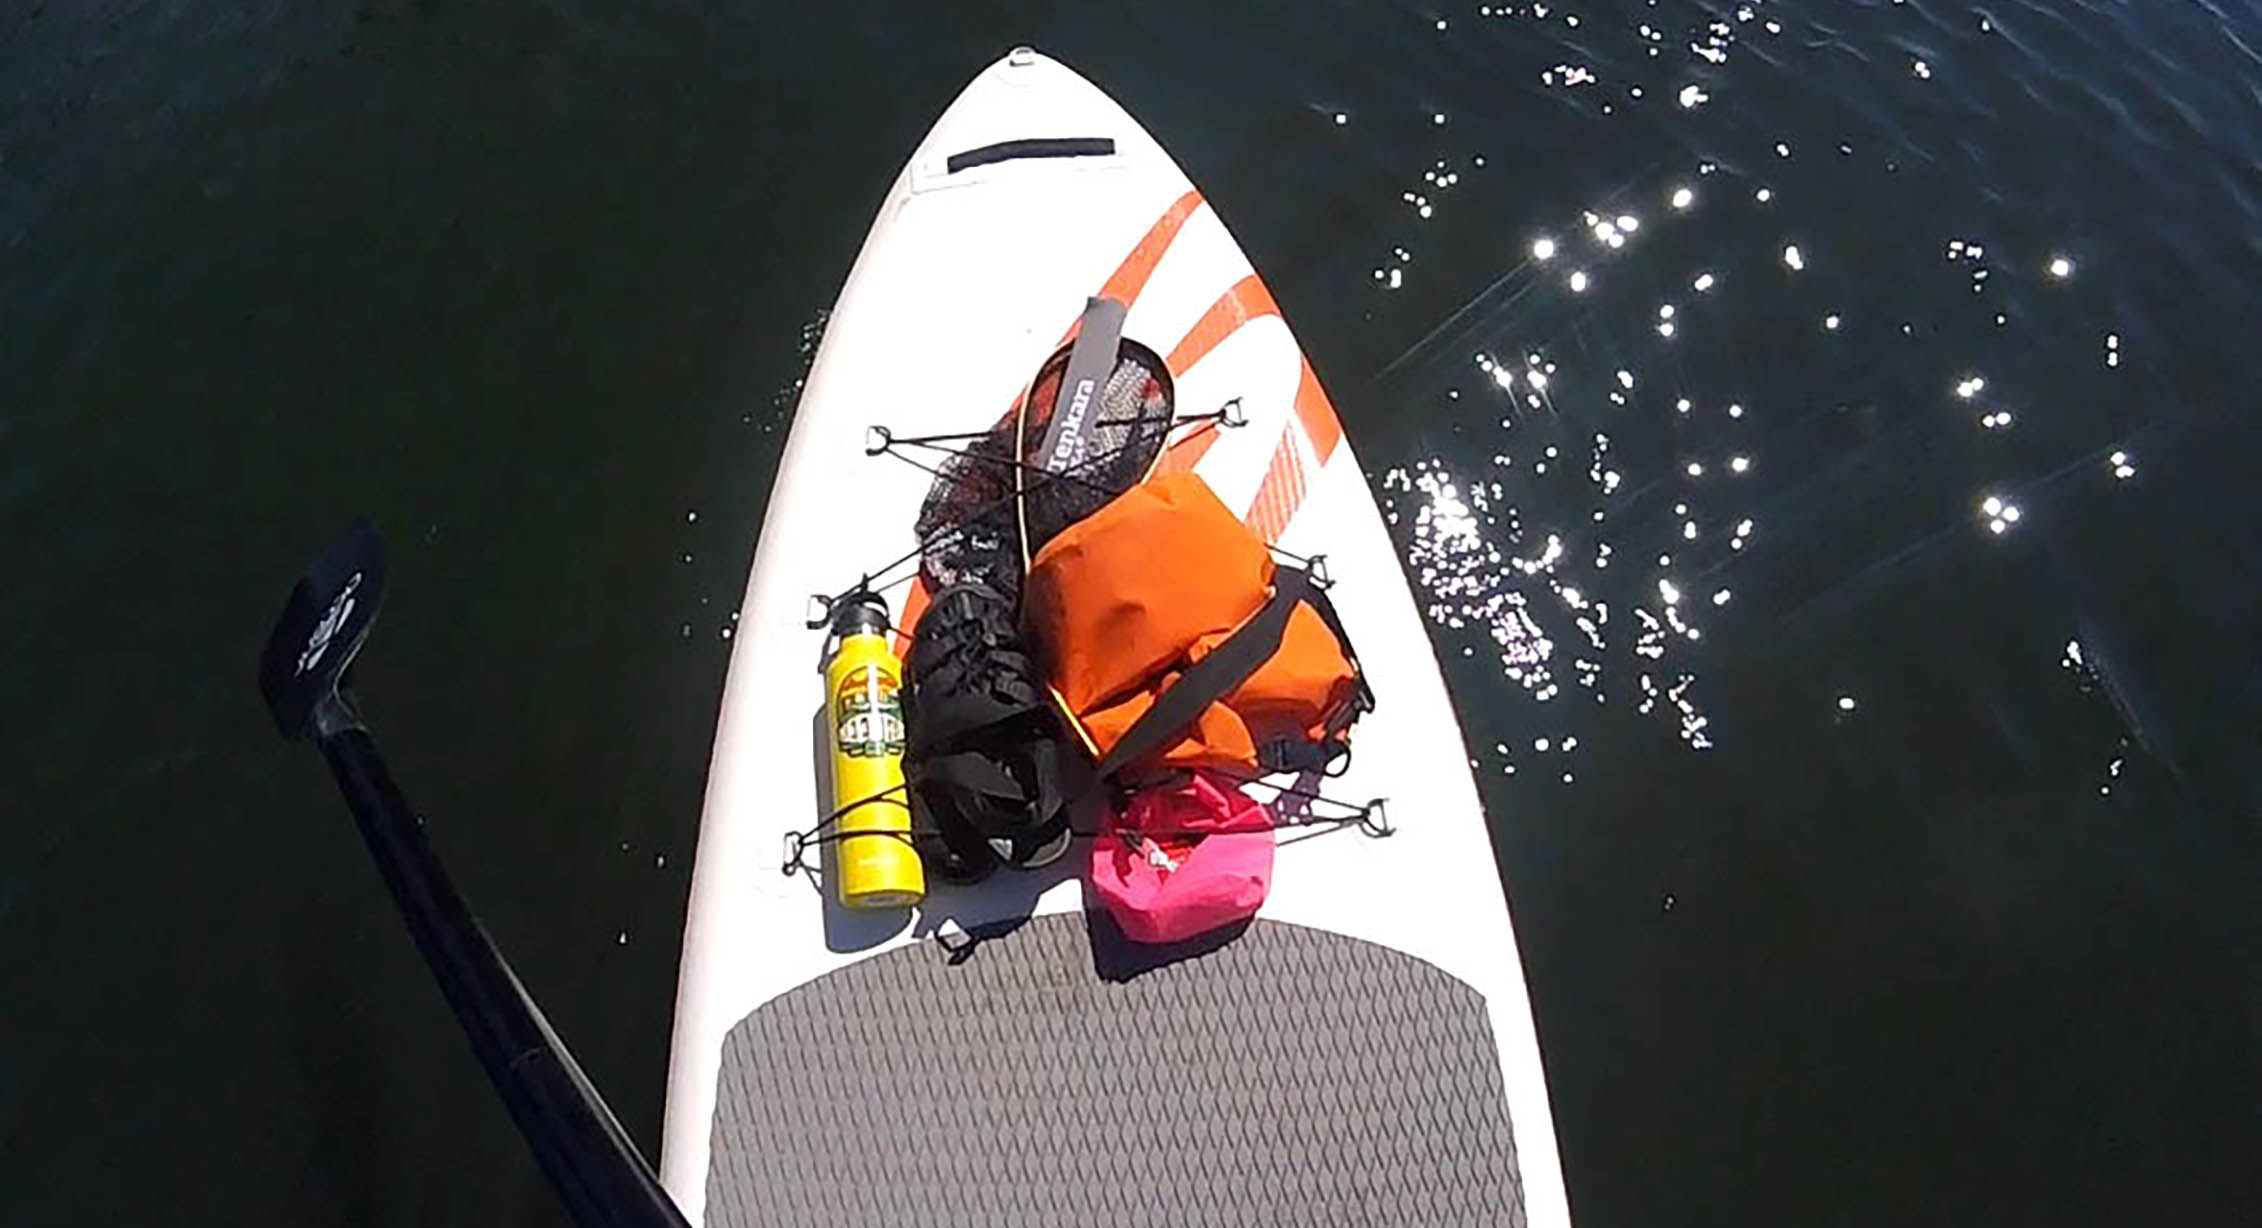 Stand-up paddleboarding with KEEN sandals and a reusable water bottle